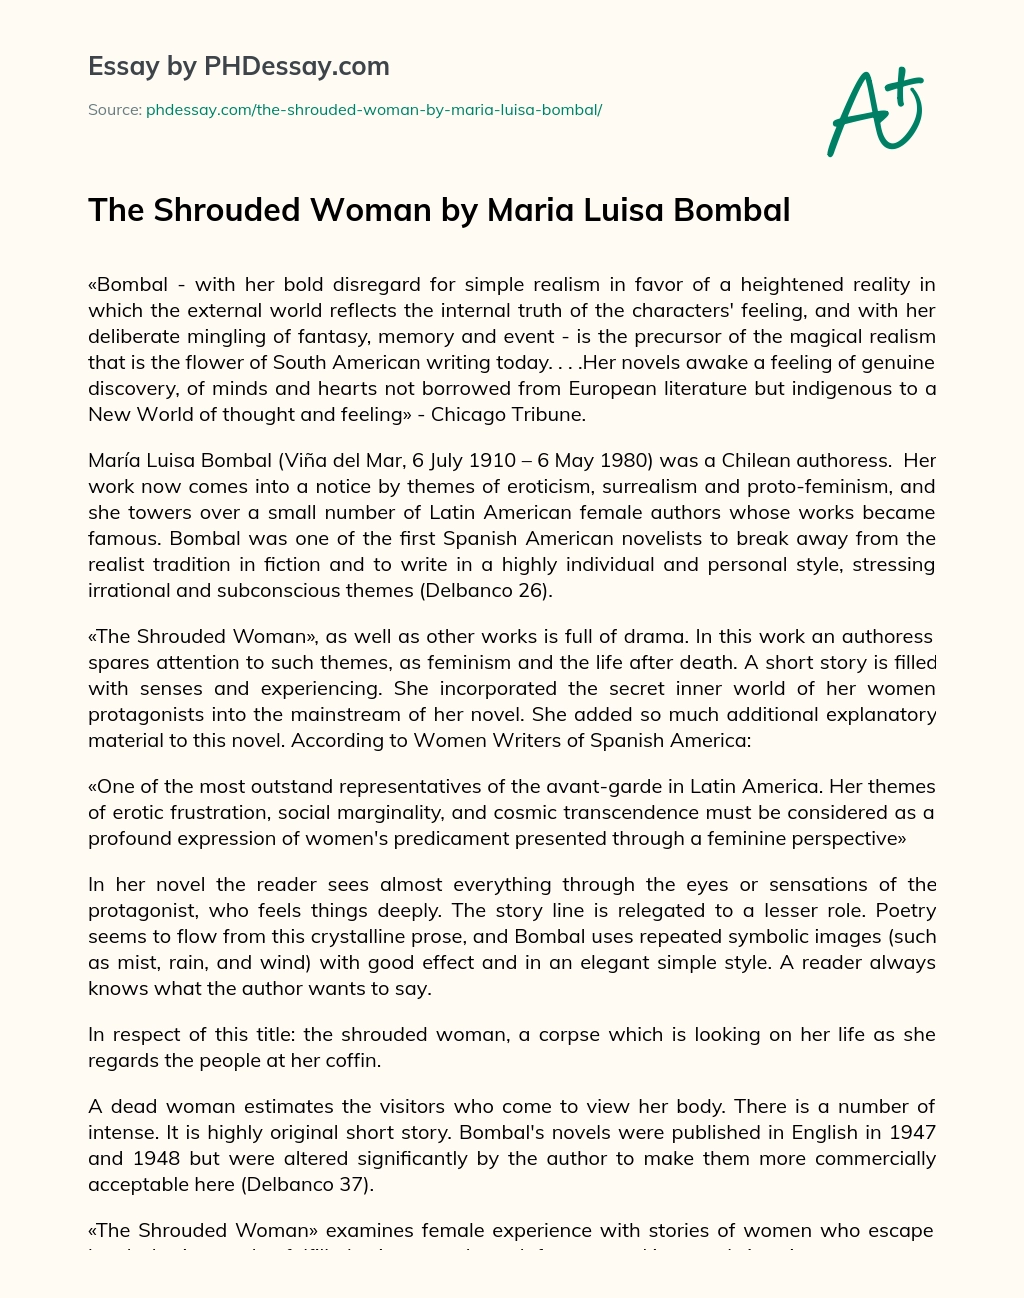 The Shrouded Woman by Maria Luisa Bombal essay